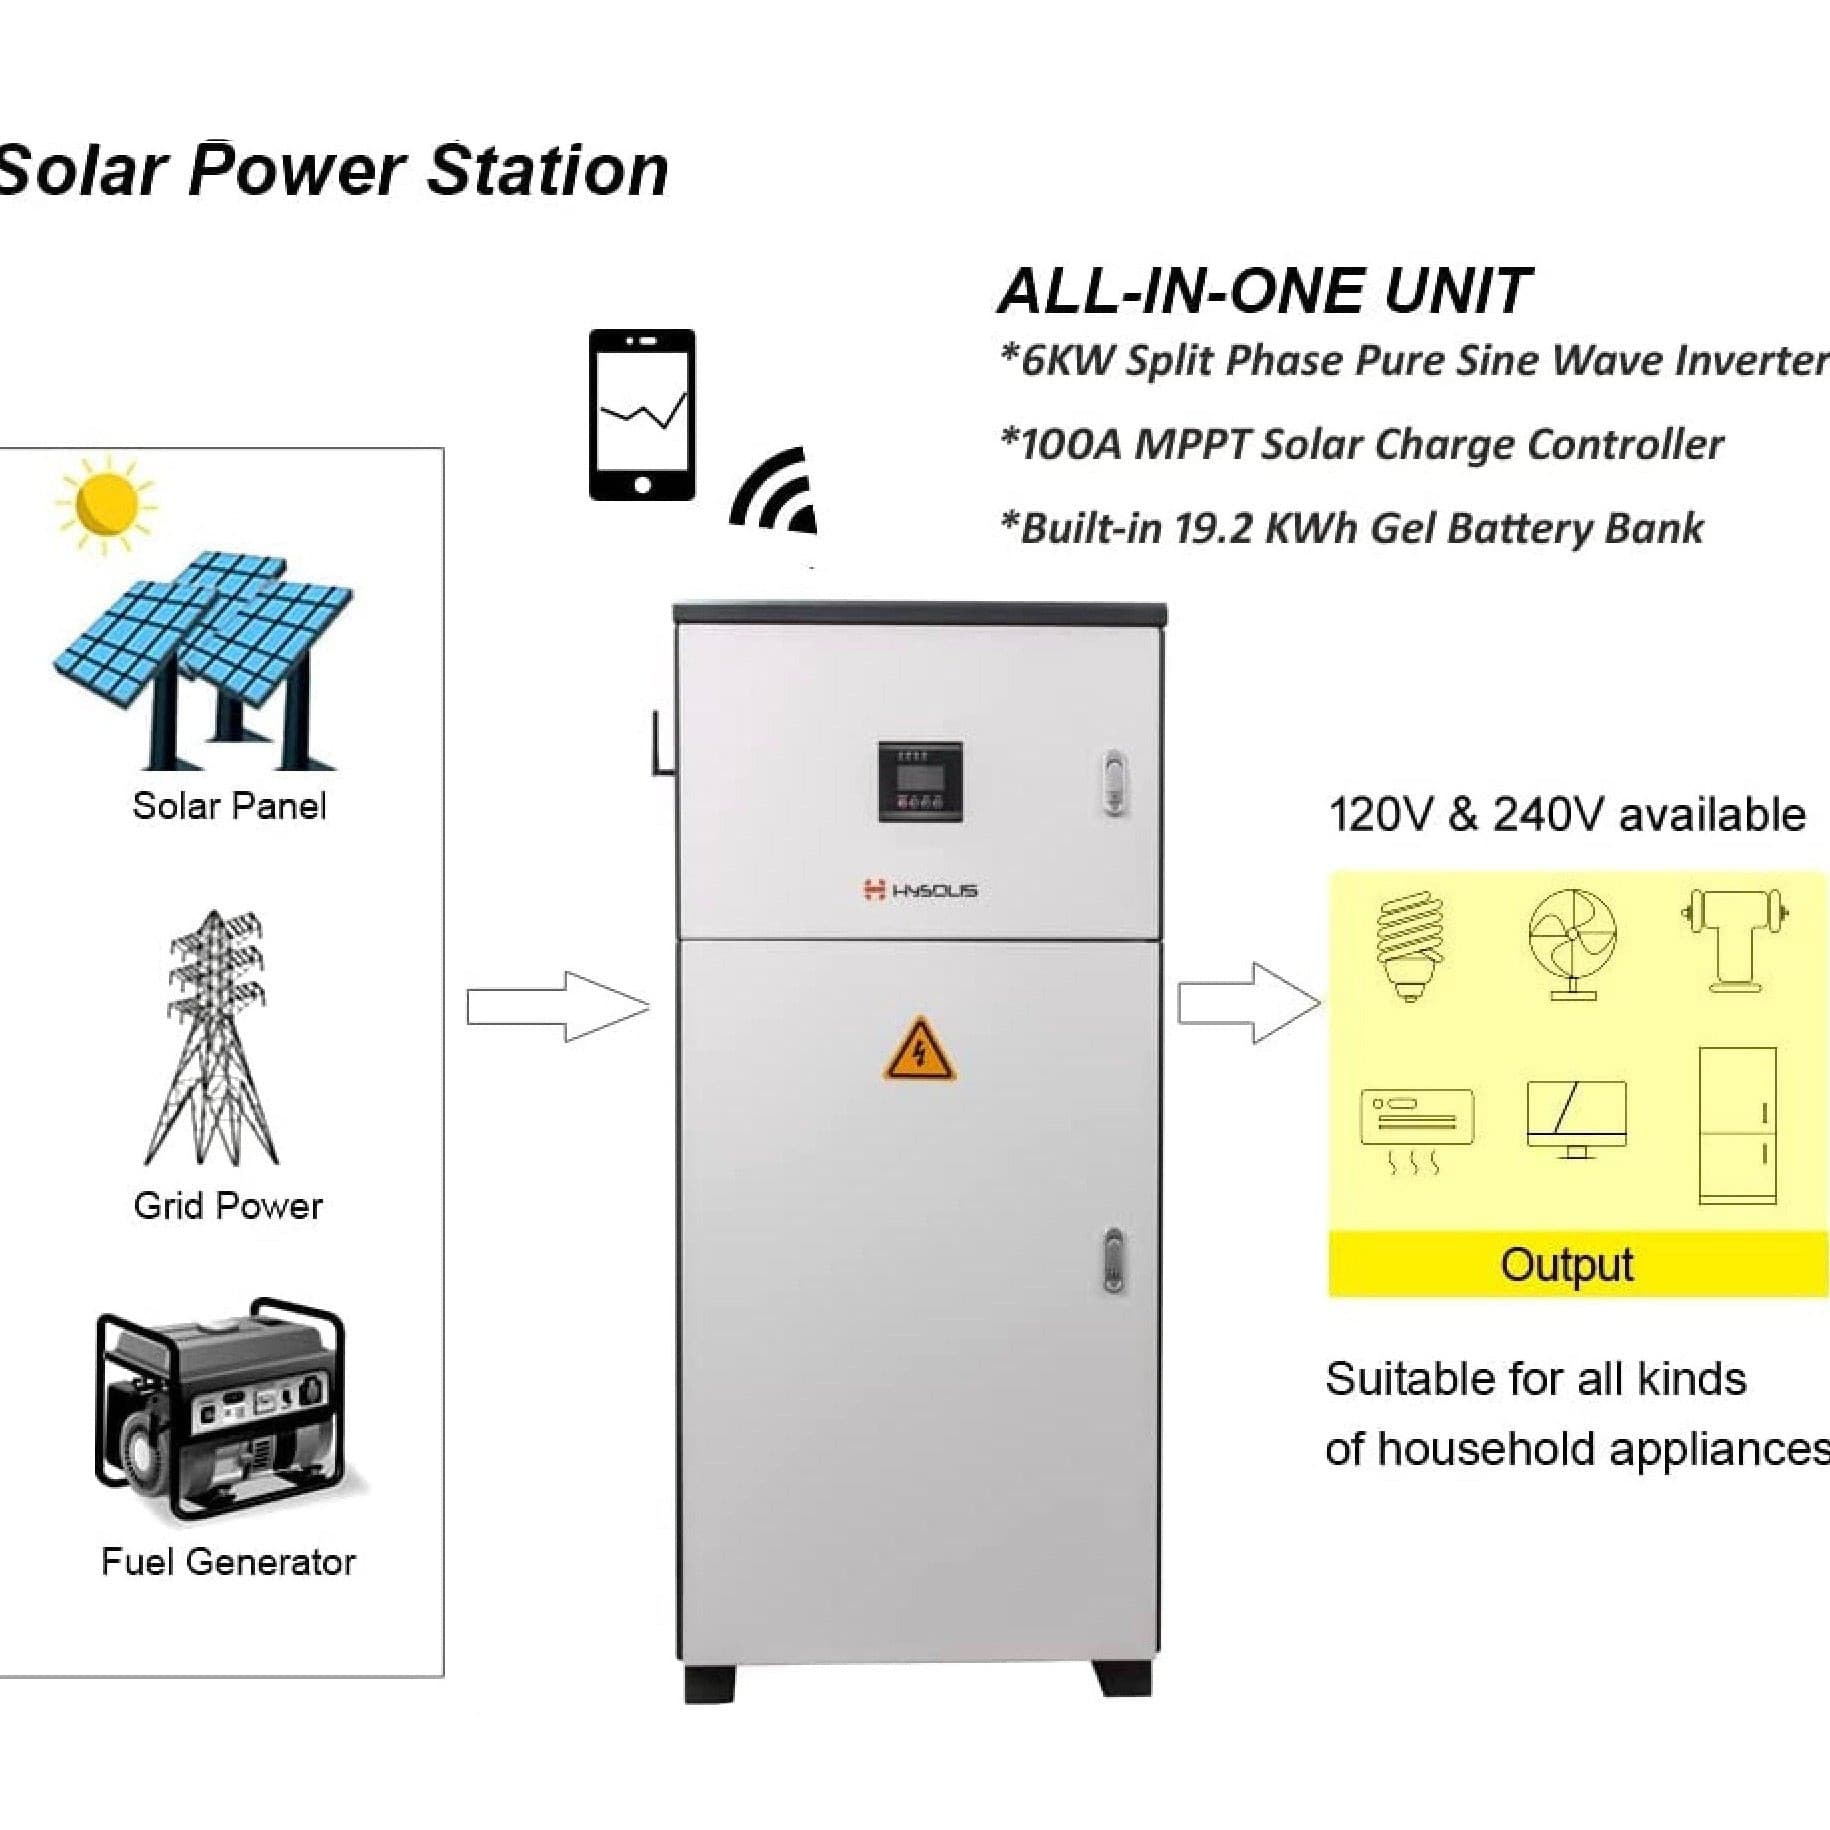 Solar Energy Storage – What Are the Benefits?